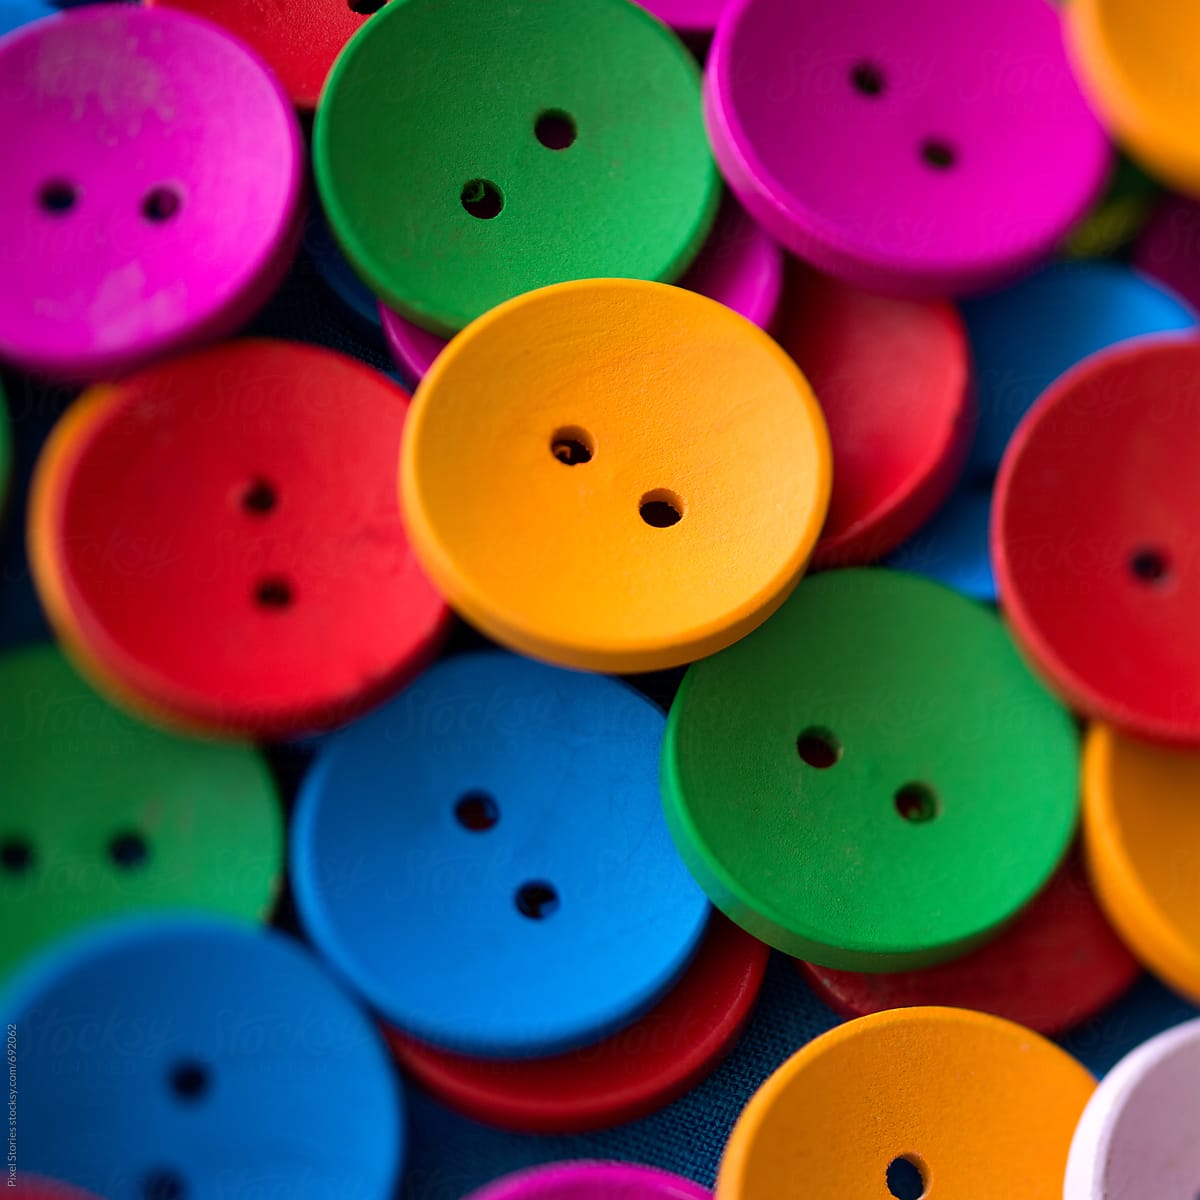 Colorful Buttons Background by Stocksy Contributor Pixel Stories -  Stocksy